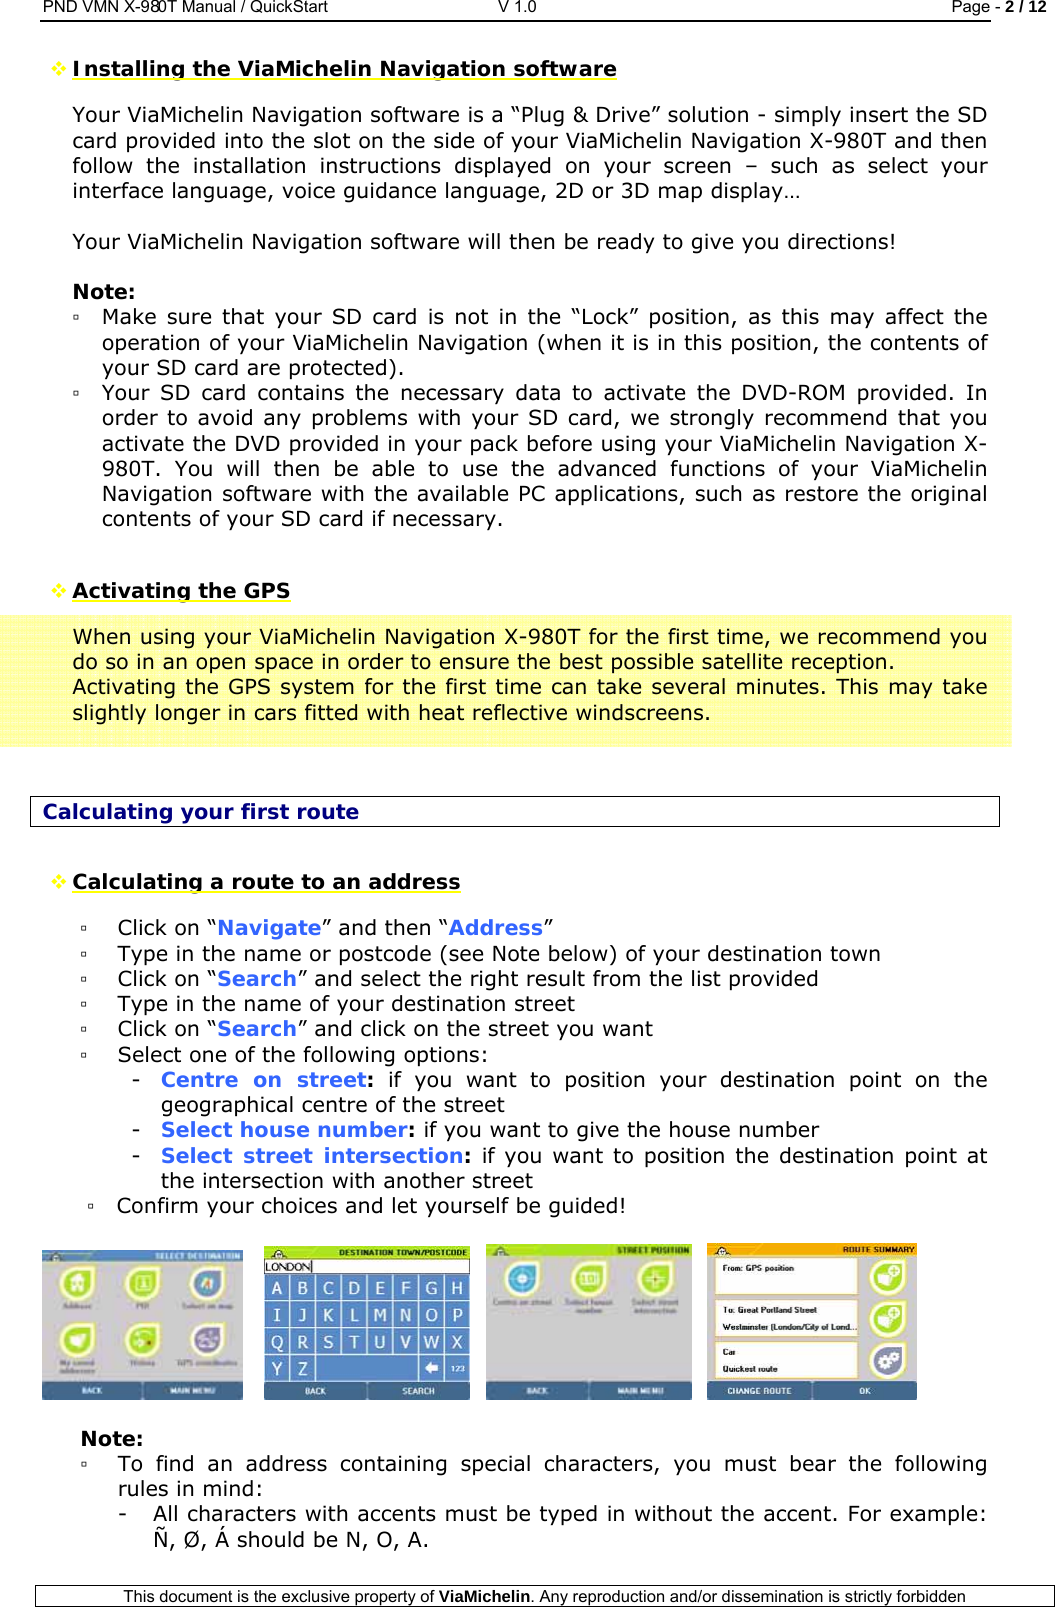 PND VMN X-980T Manual / QuickStart   V 1.0  Page - 2 / 12  This document is the exclusive property of ViaMichelin. Any reproduction and/or dissemination is strictly forbidden   Installing the ViaMichelin Navigation software Your ViaMichelin Navigation software is a “Plug &amp; Drive” solution - simply insert the SD card provided into the slot on the side of your ViaMichelin Navigation X-980T and then follow the installation instructions displayed on your screen – such as select your interface language, voice guidance language, 2D or 3D map display…  Your ViaMichelin Navigation software will then be ready to give you directions!  Note: ▫ Make sure that your SD card is not in the “Lock” position, as this may affect the operation of your ViaMichelin Navigation (when it is in this position, the contents of your SD card are protected). ▫ Your SD card contains the necessary data to activate the DVD-ROM provided. In order to avoid any problems with your SD card, we strongly recommend that you activate the DVD provided in your pack before using your ViaMichelin Navigation X-980T. You will then be able to use the advanced functions of your ViaMichelin Navigation software with the available PC applications, such as restore the original contents of your SD card if necessary.   Activating the GPS When using your ViaMichelin Navigation X-980T for the first time, we recommend you do so in an open space in order to ensure the best possible satellite reception. Activating the GPS system for the first time can take several minutes. This may take slightly longer in cars fitted with heat reflective windscreens.   Calculating your first route  Calculating a route to an address ▫ Click on “Navigate” and then “Address” ▫ Type in the name or postcode (see Note below) of your destination town ▫ Click on “Search” and select the right result from the list provided ▫ Type in the name of your destination street ▫ Click on “Search” and click on the street you want ▫ Select one of the following options: - Centre on street: if you want to position your destination point on the geographical centre of the street - Select house number: if you want to give the house number - Select street intersection: if you want to position the destination point at the intersection with another street ▫ Confirm your choices and let yourself be guided!          Note: ▫ To find an address containing special characters, you must bear the following rules in mind: - All characters with accents must be typed in without the accent. For example: Ñ, Ø, Á should be N, O, A. 